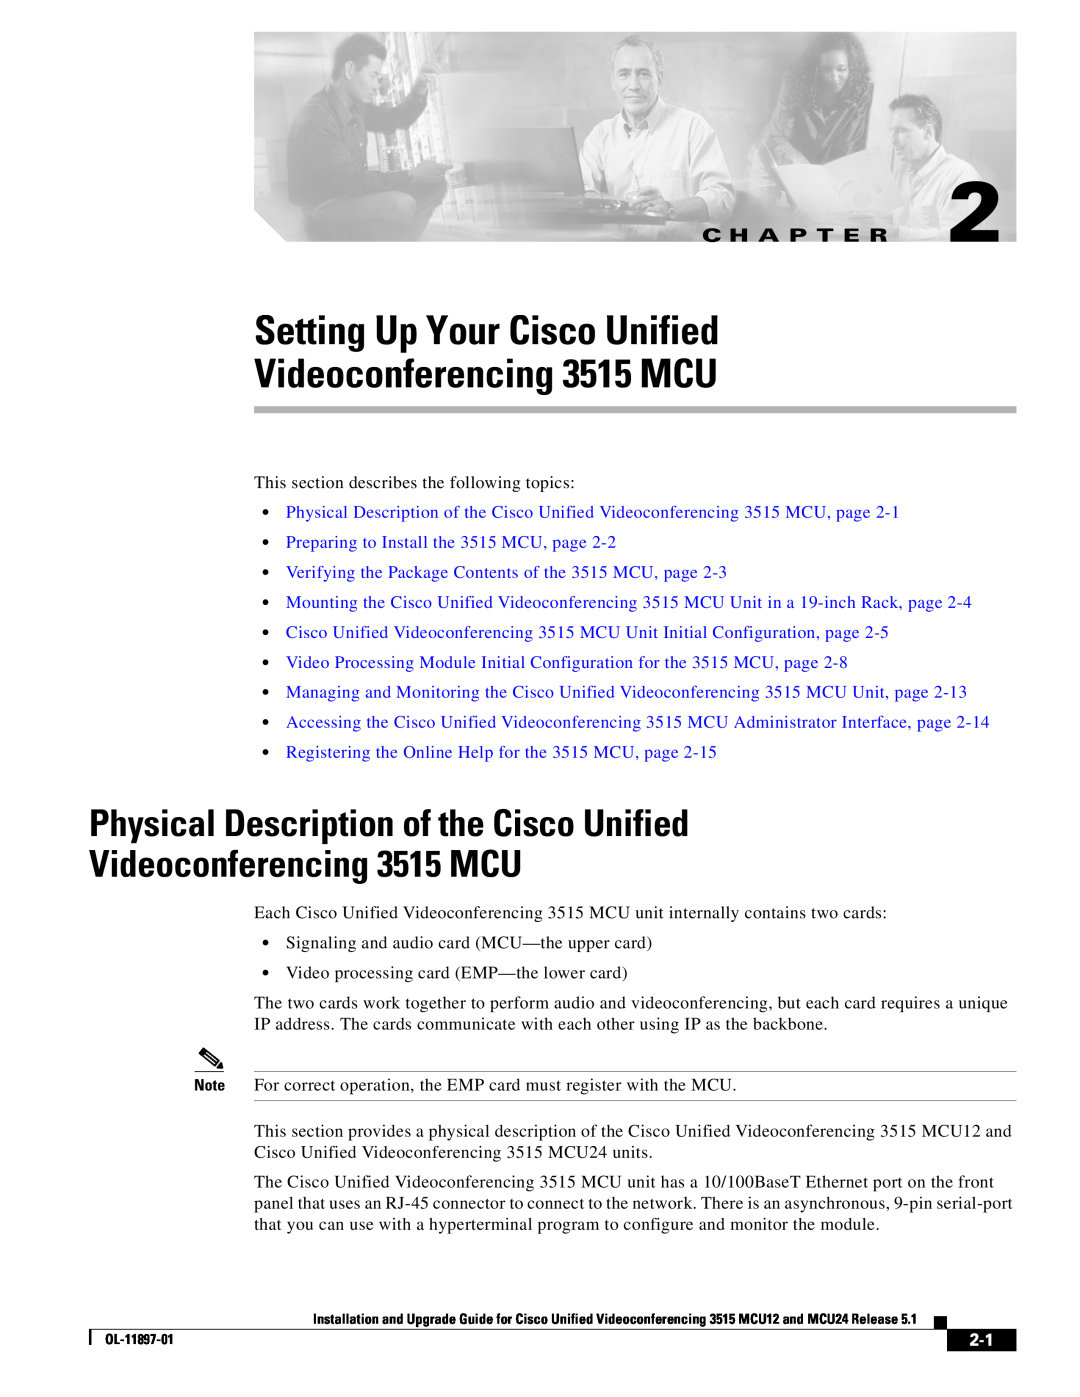 Cisco Systems MCU24 manual Setting Up Your Cisco Unified Videoconferencing 3515 MCU, C H A P T E R 